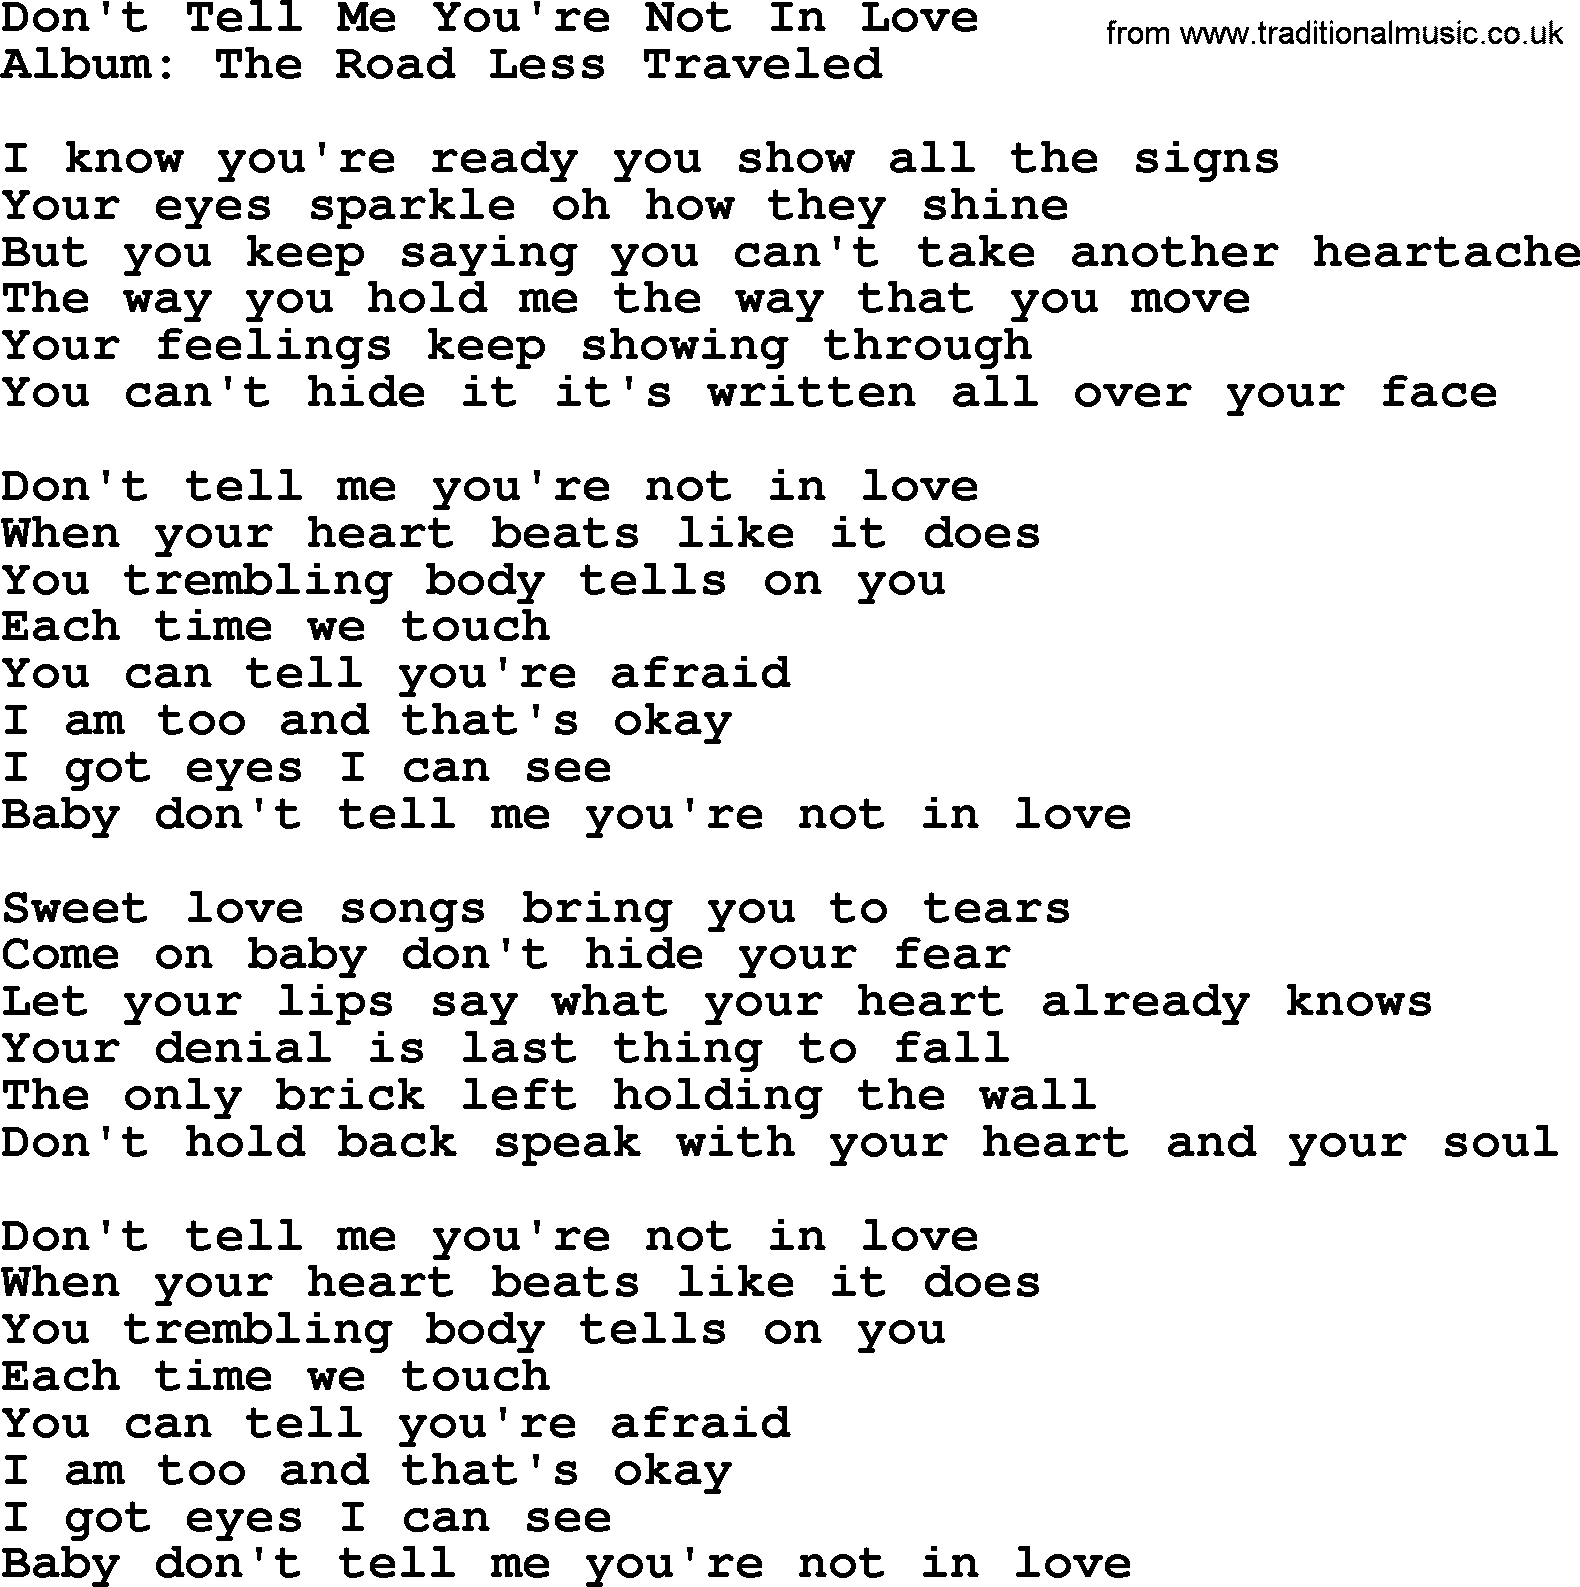 George Strait song: Don't Tell Me You're Not In Love, lyrics